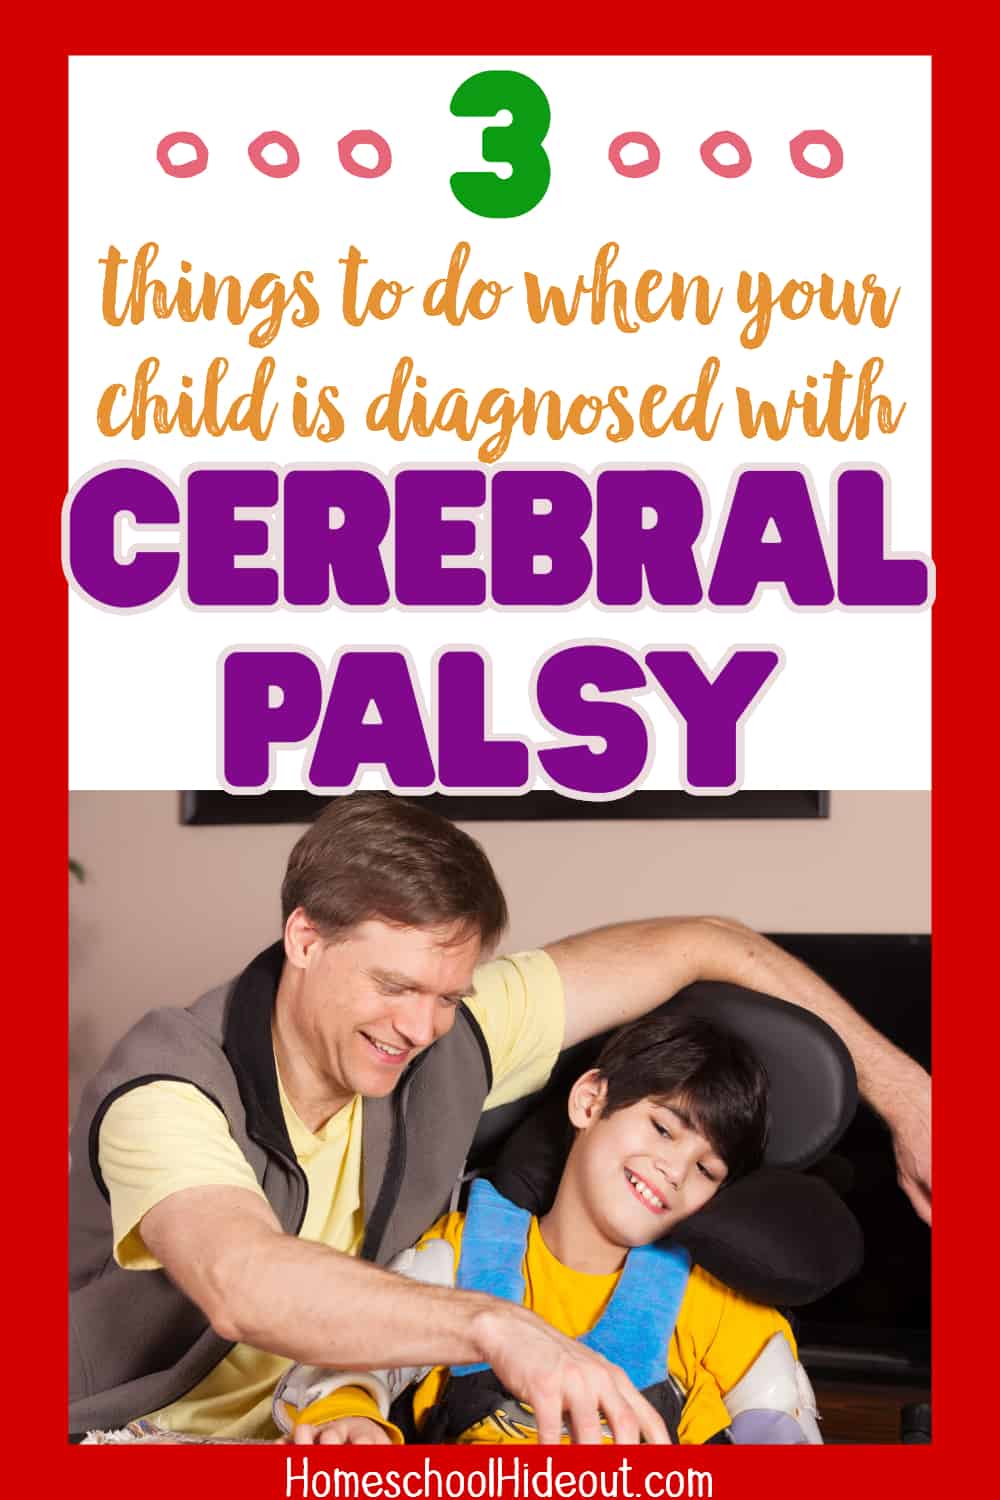 Having a child diagnosed with Cerebral Palsy is stressful but these tips are super helpful! Just need to remember to do them!